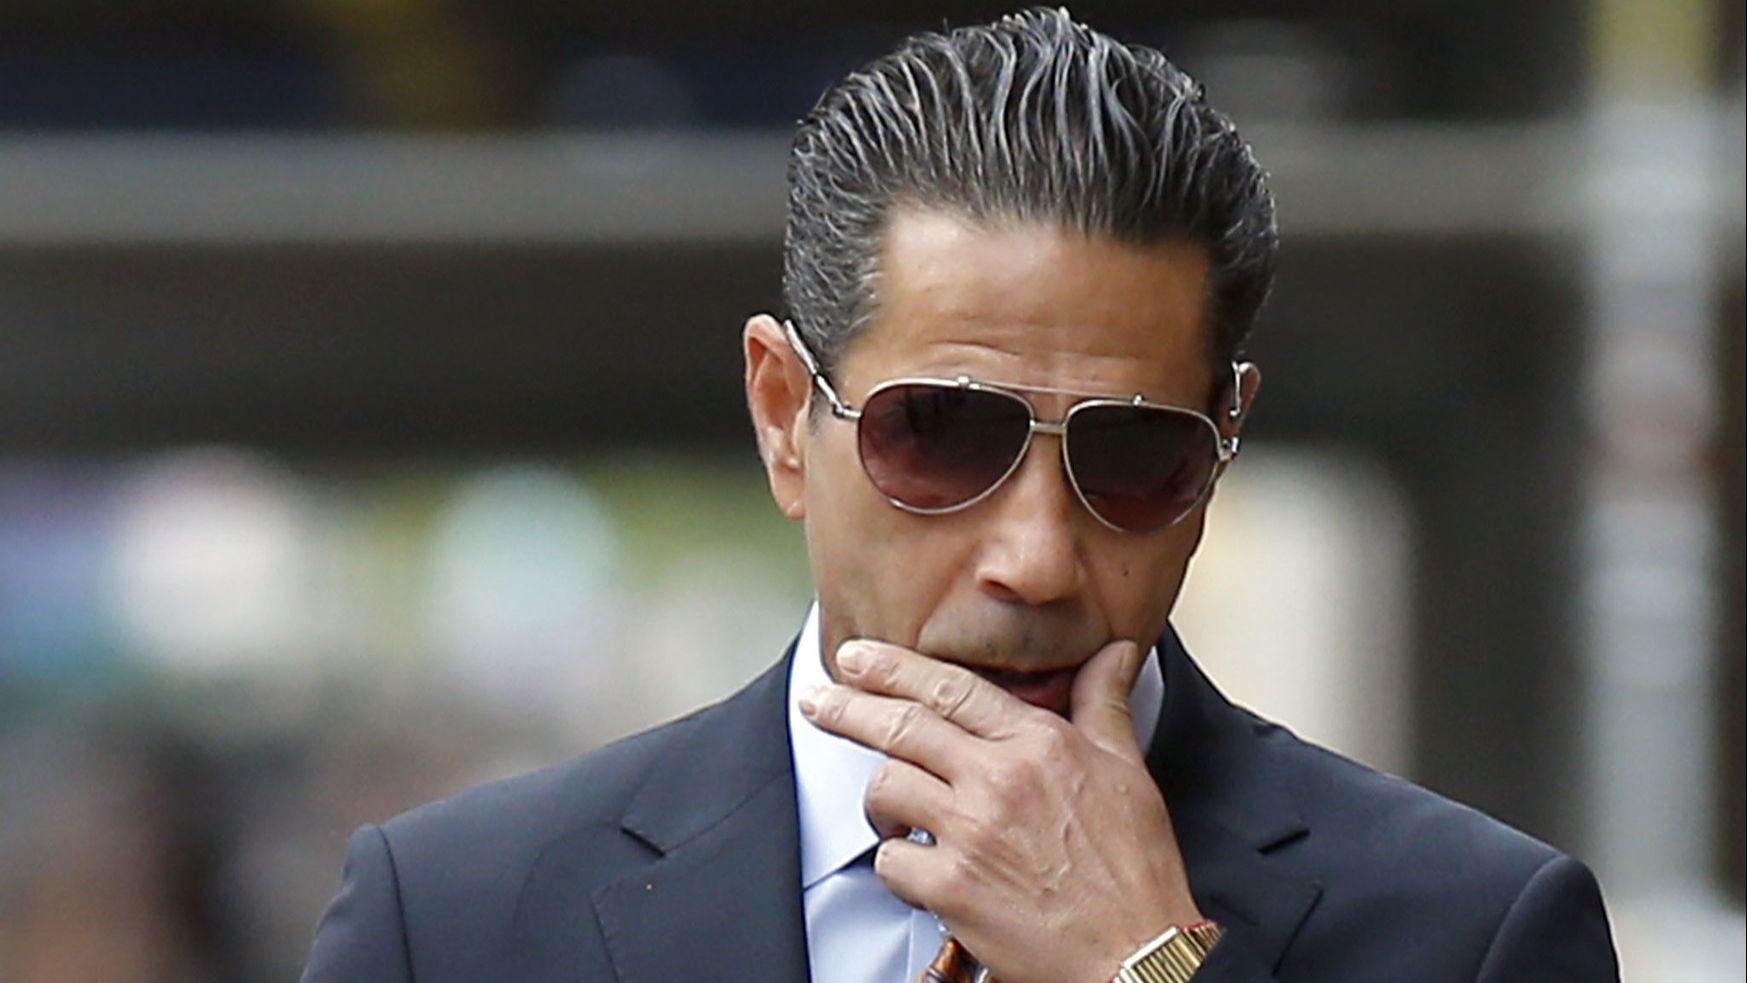 'Skinny Joey' Merlino, mob boss who moved to Boca Raton, gets 2 years in prison - Sun ...